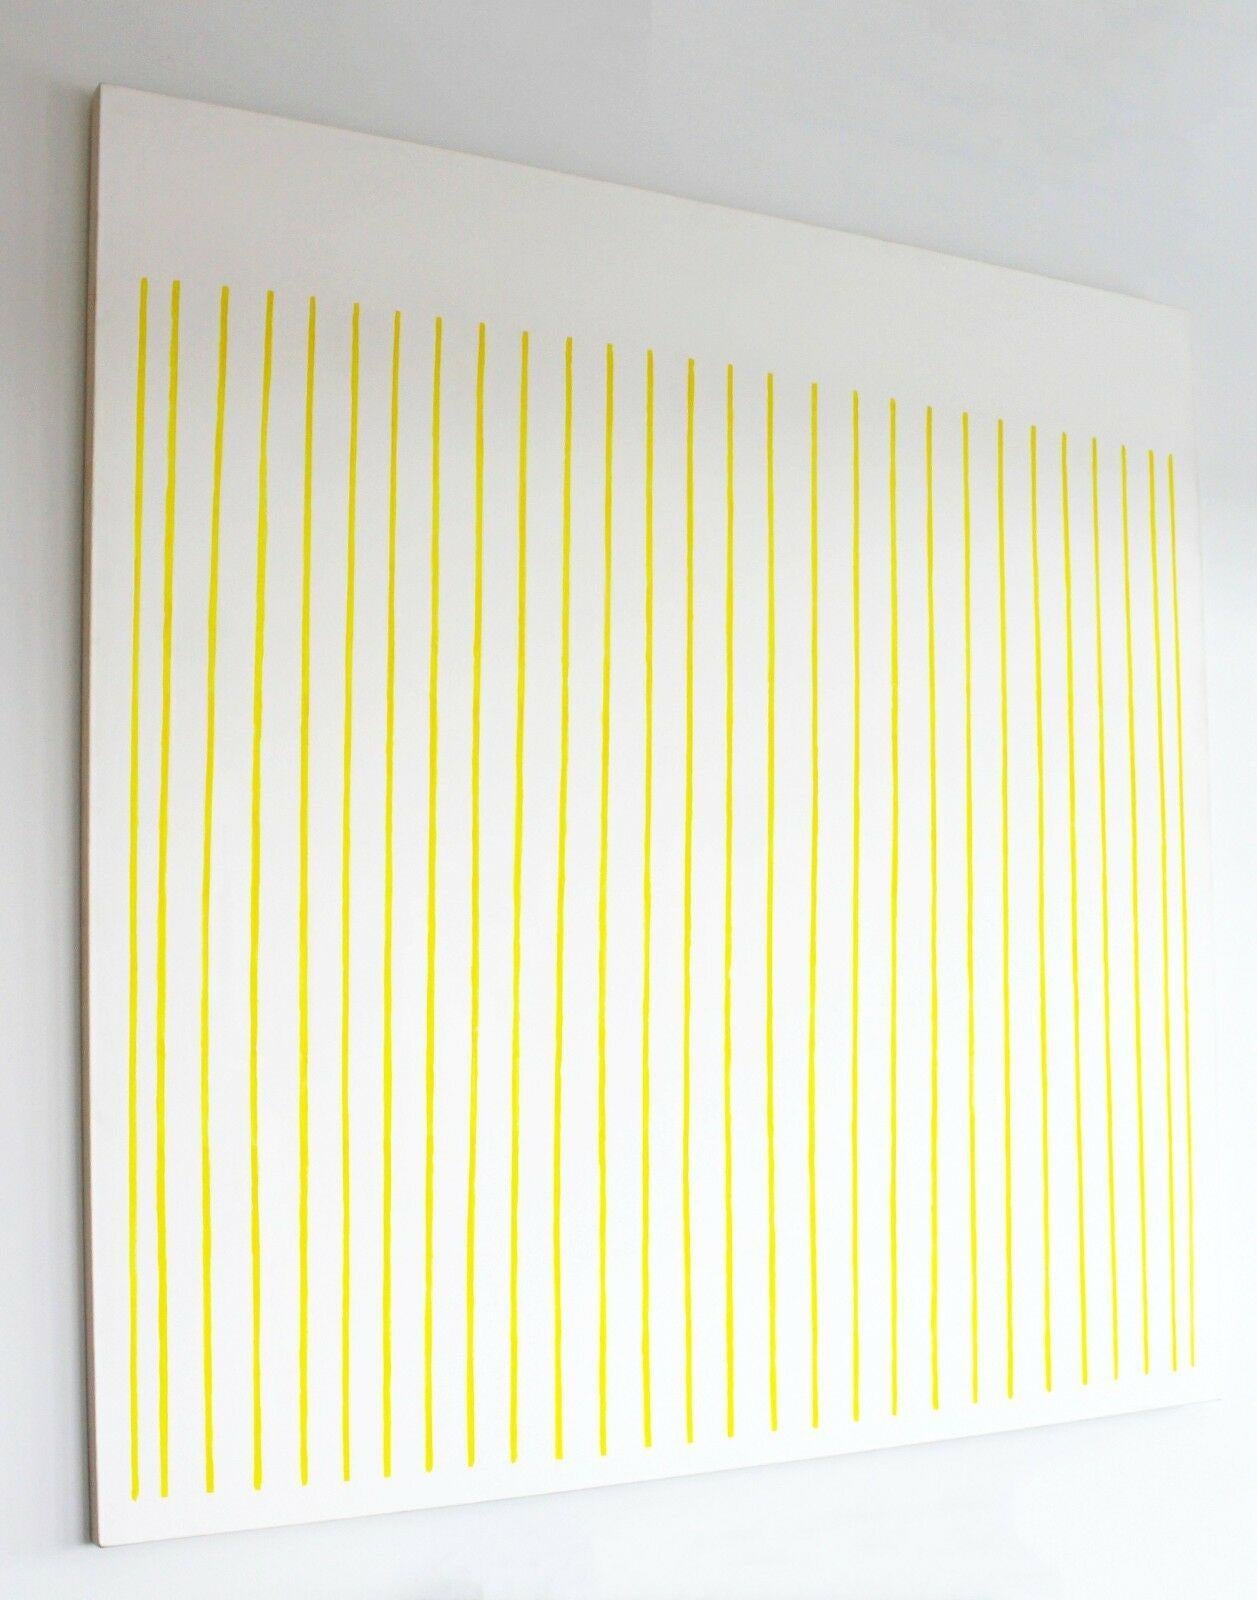 For your consideration is a sweet, extra large, yellow striped painting, signed on the back by Dan Walsh. Painted in 1995 and in excellent condition. The dimensions are 70